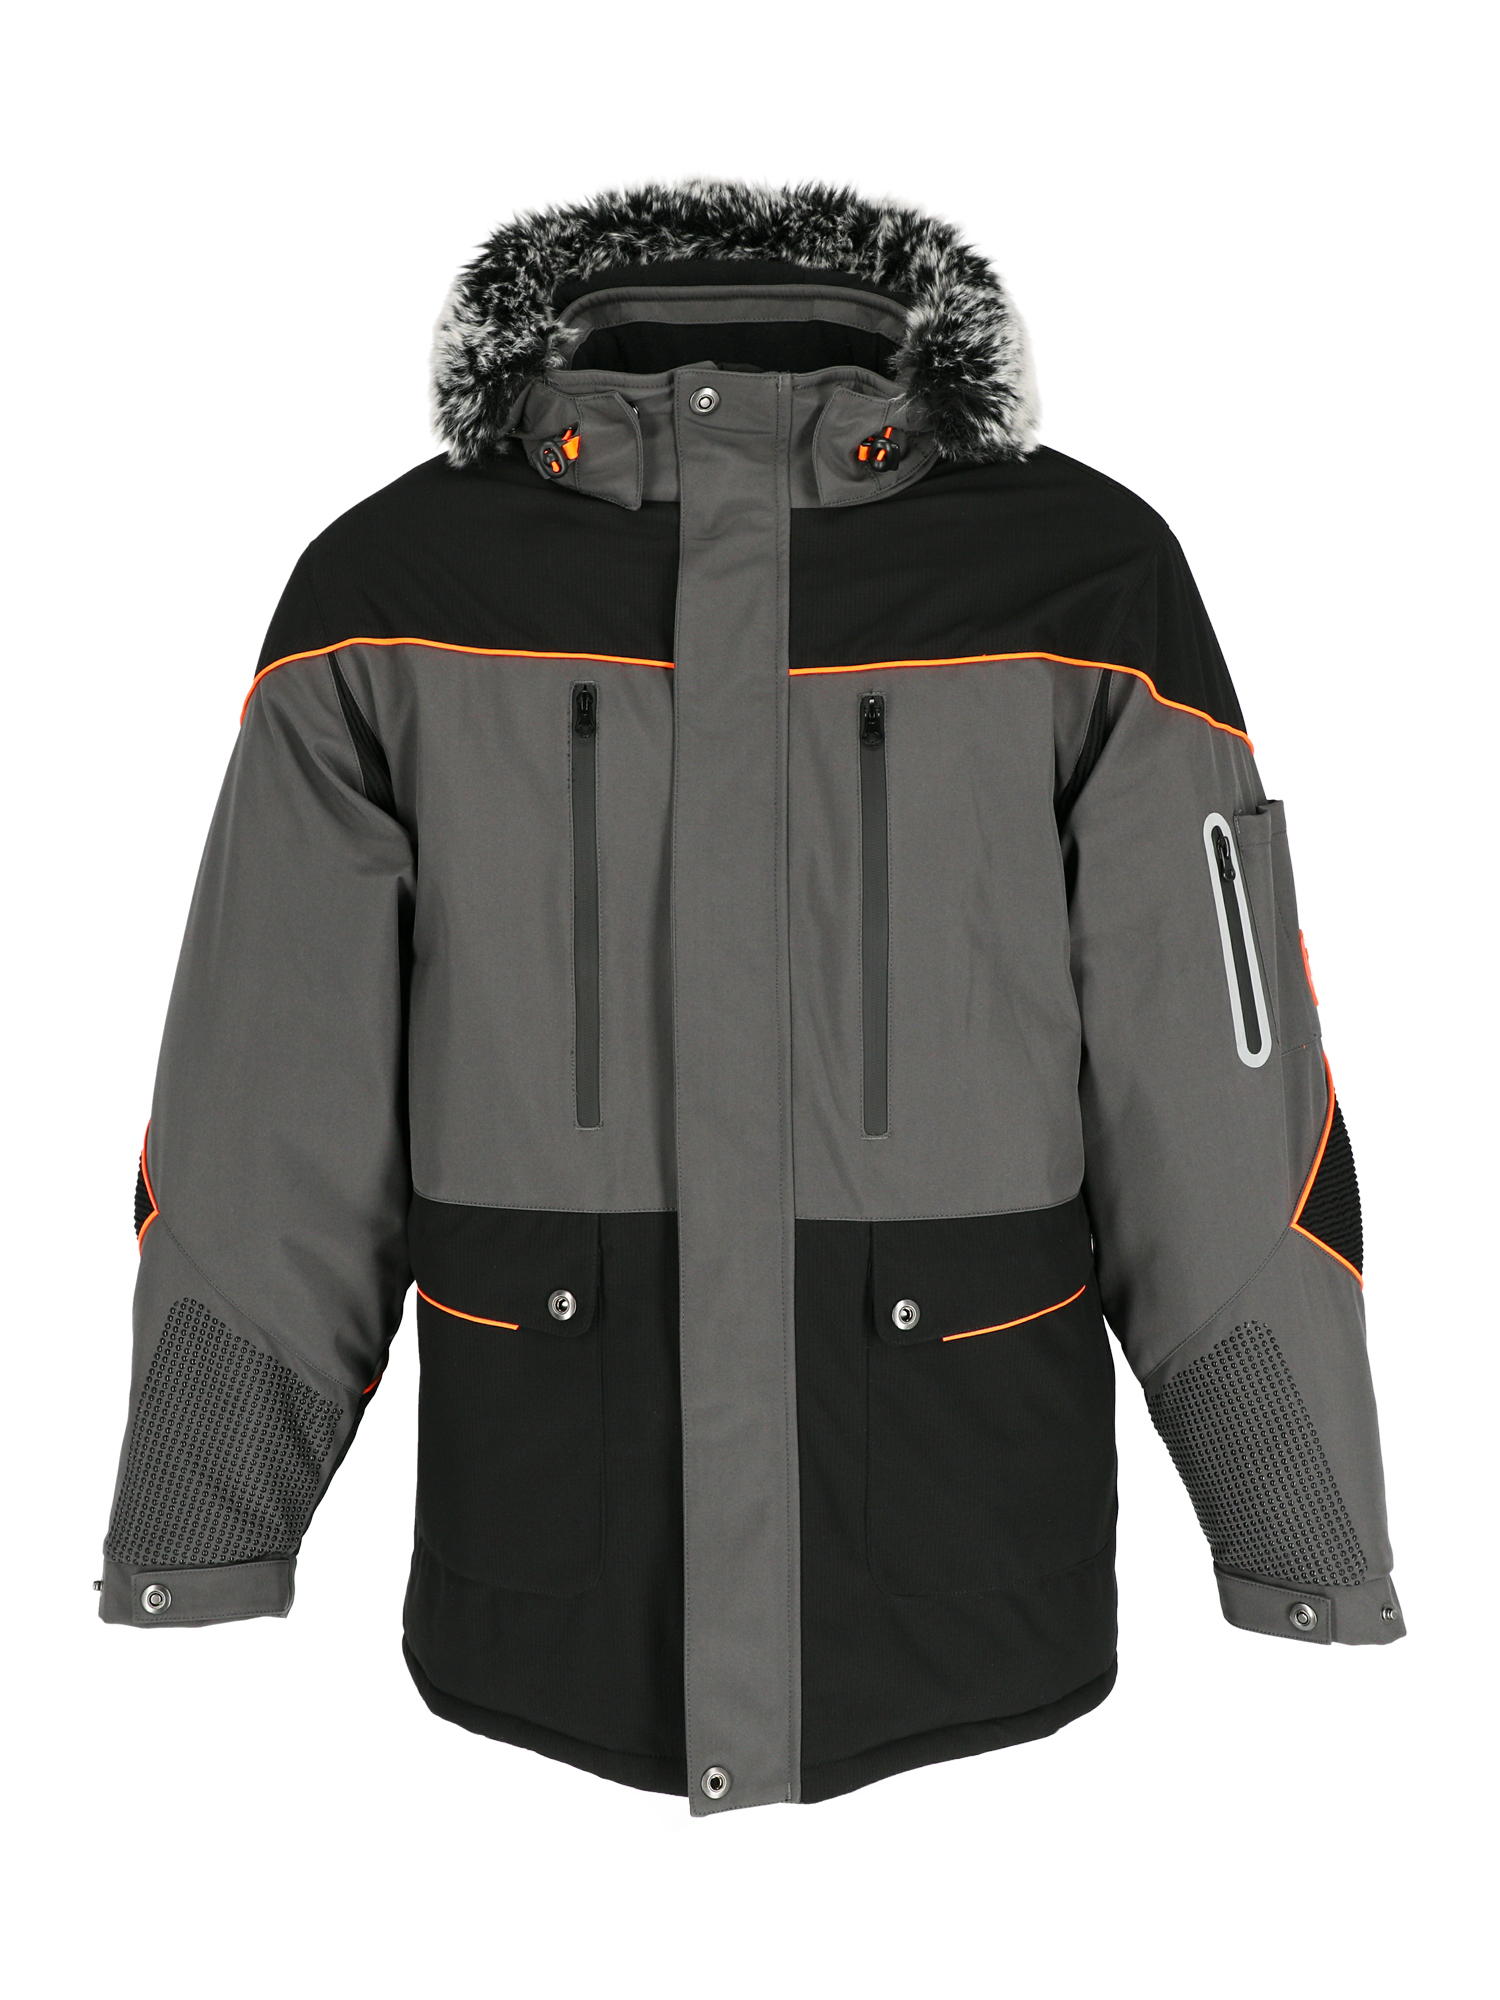 PolarForce® Parka (8340) | Rated for -40°F | RefrigiWear